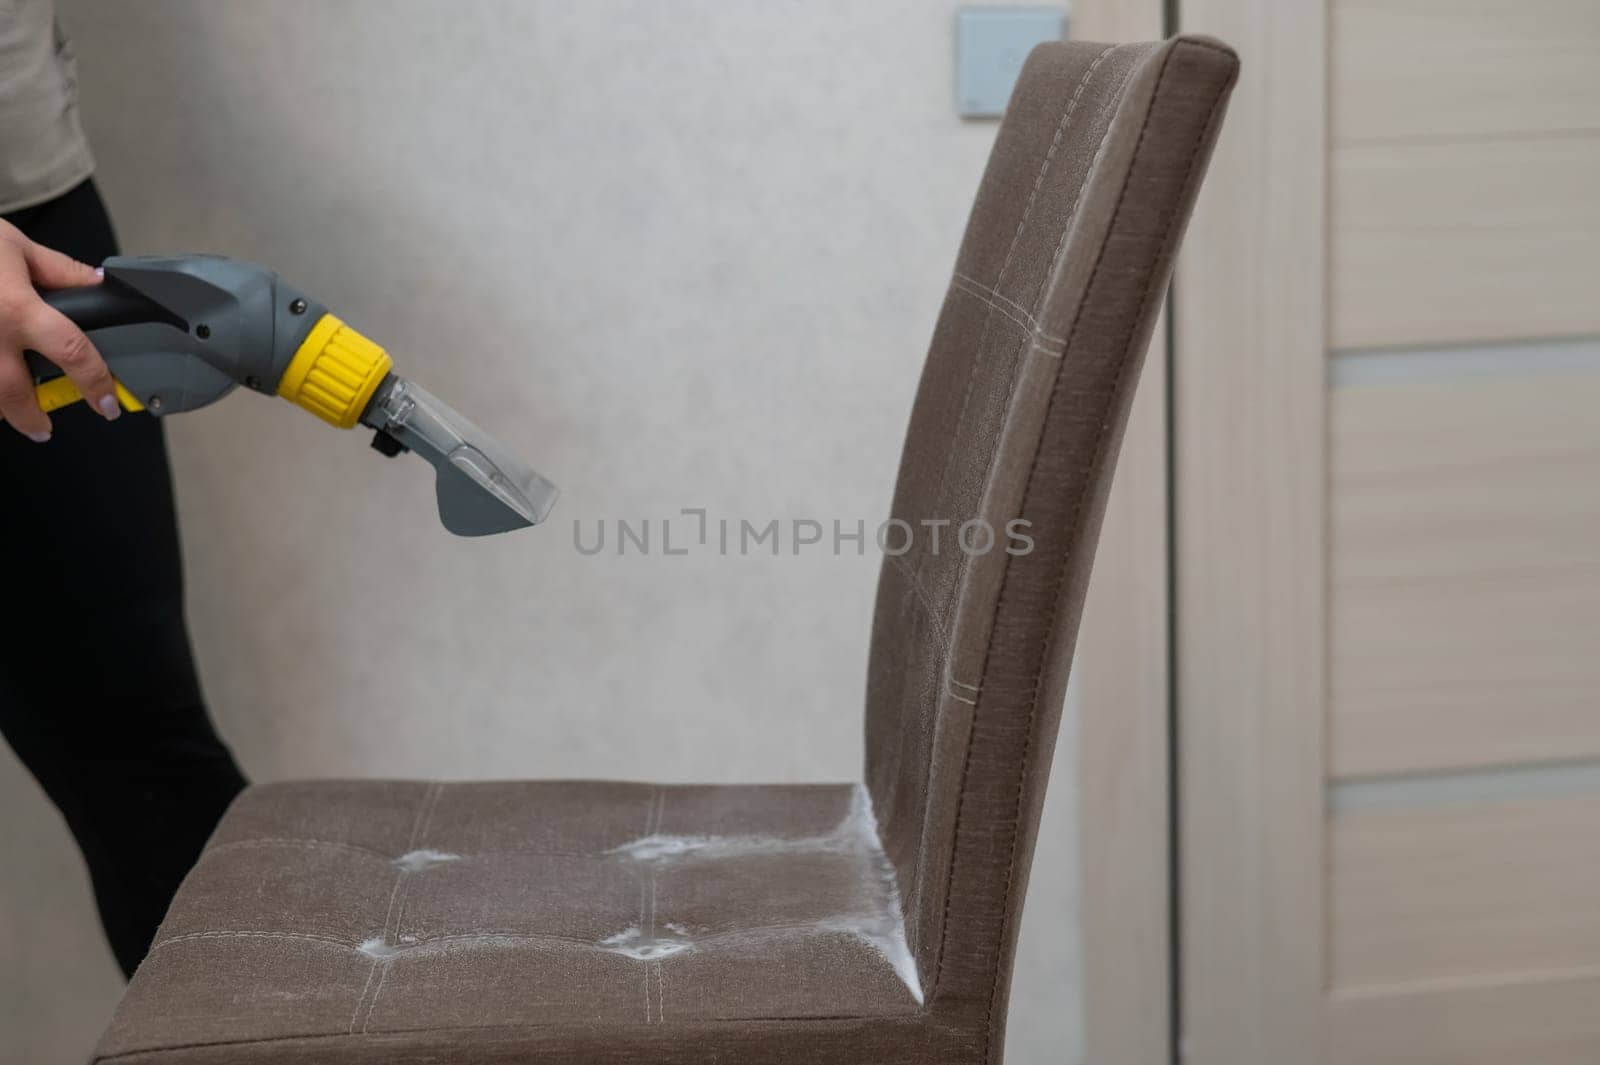 Woman cleaning a fabric chair with a professional washing vacuum cleaner